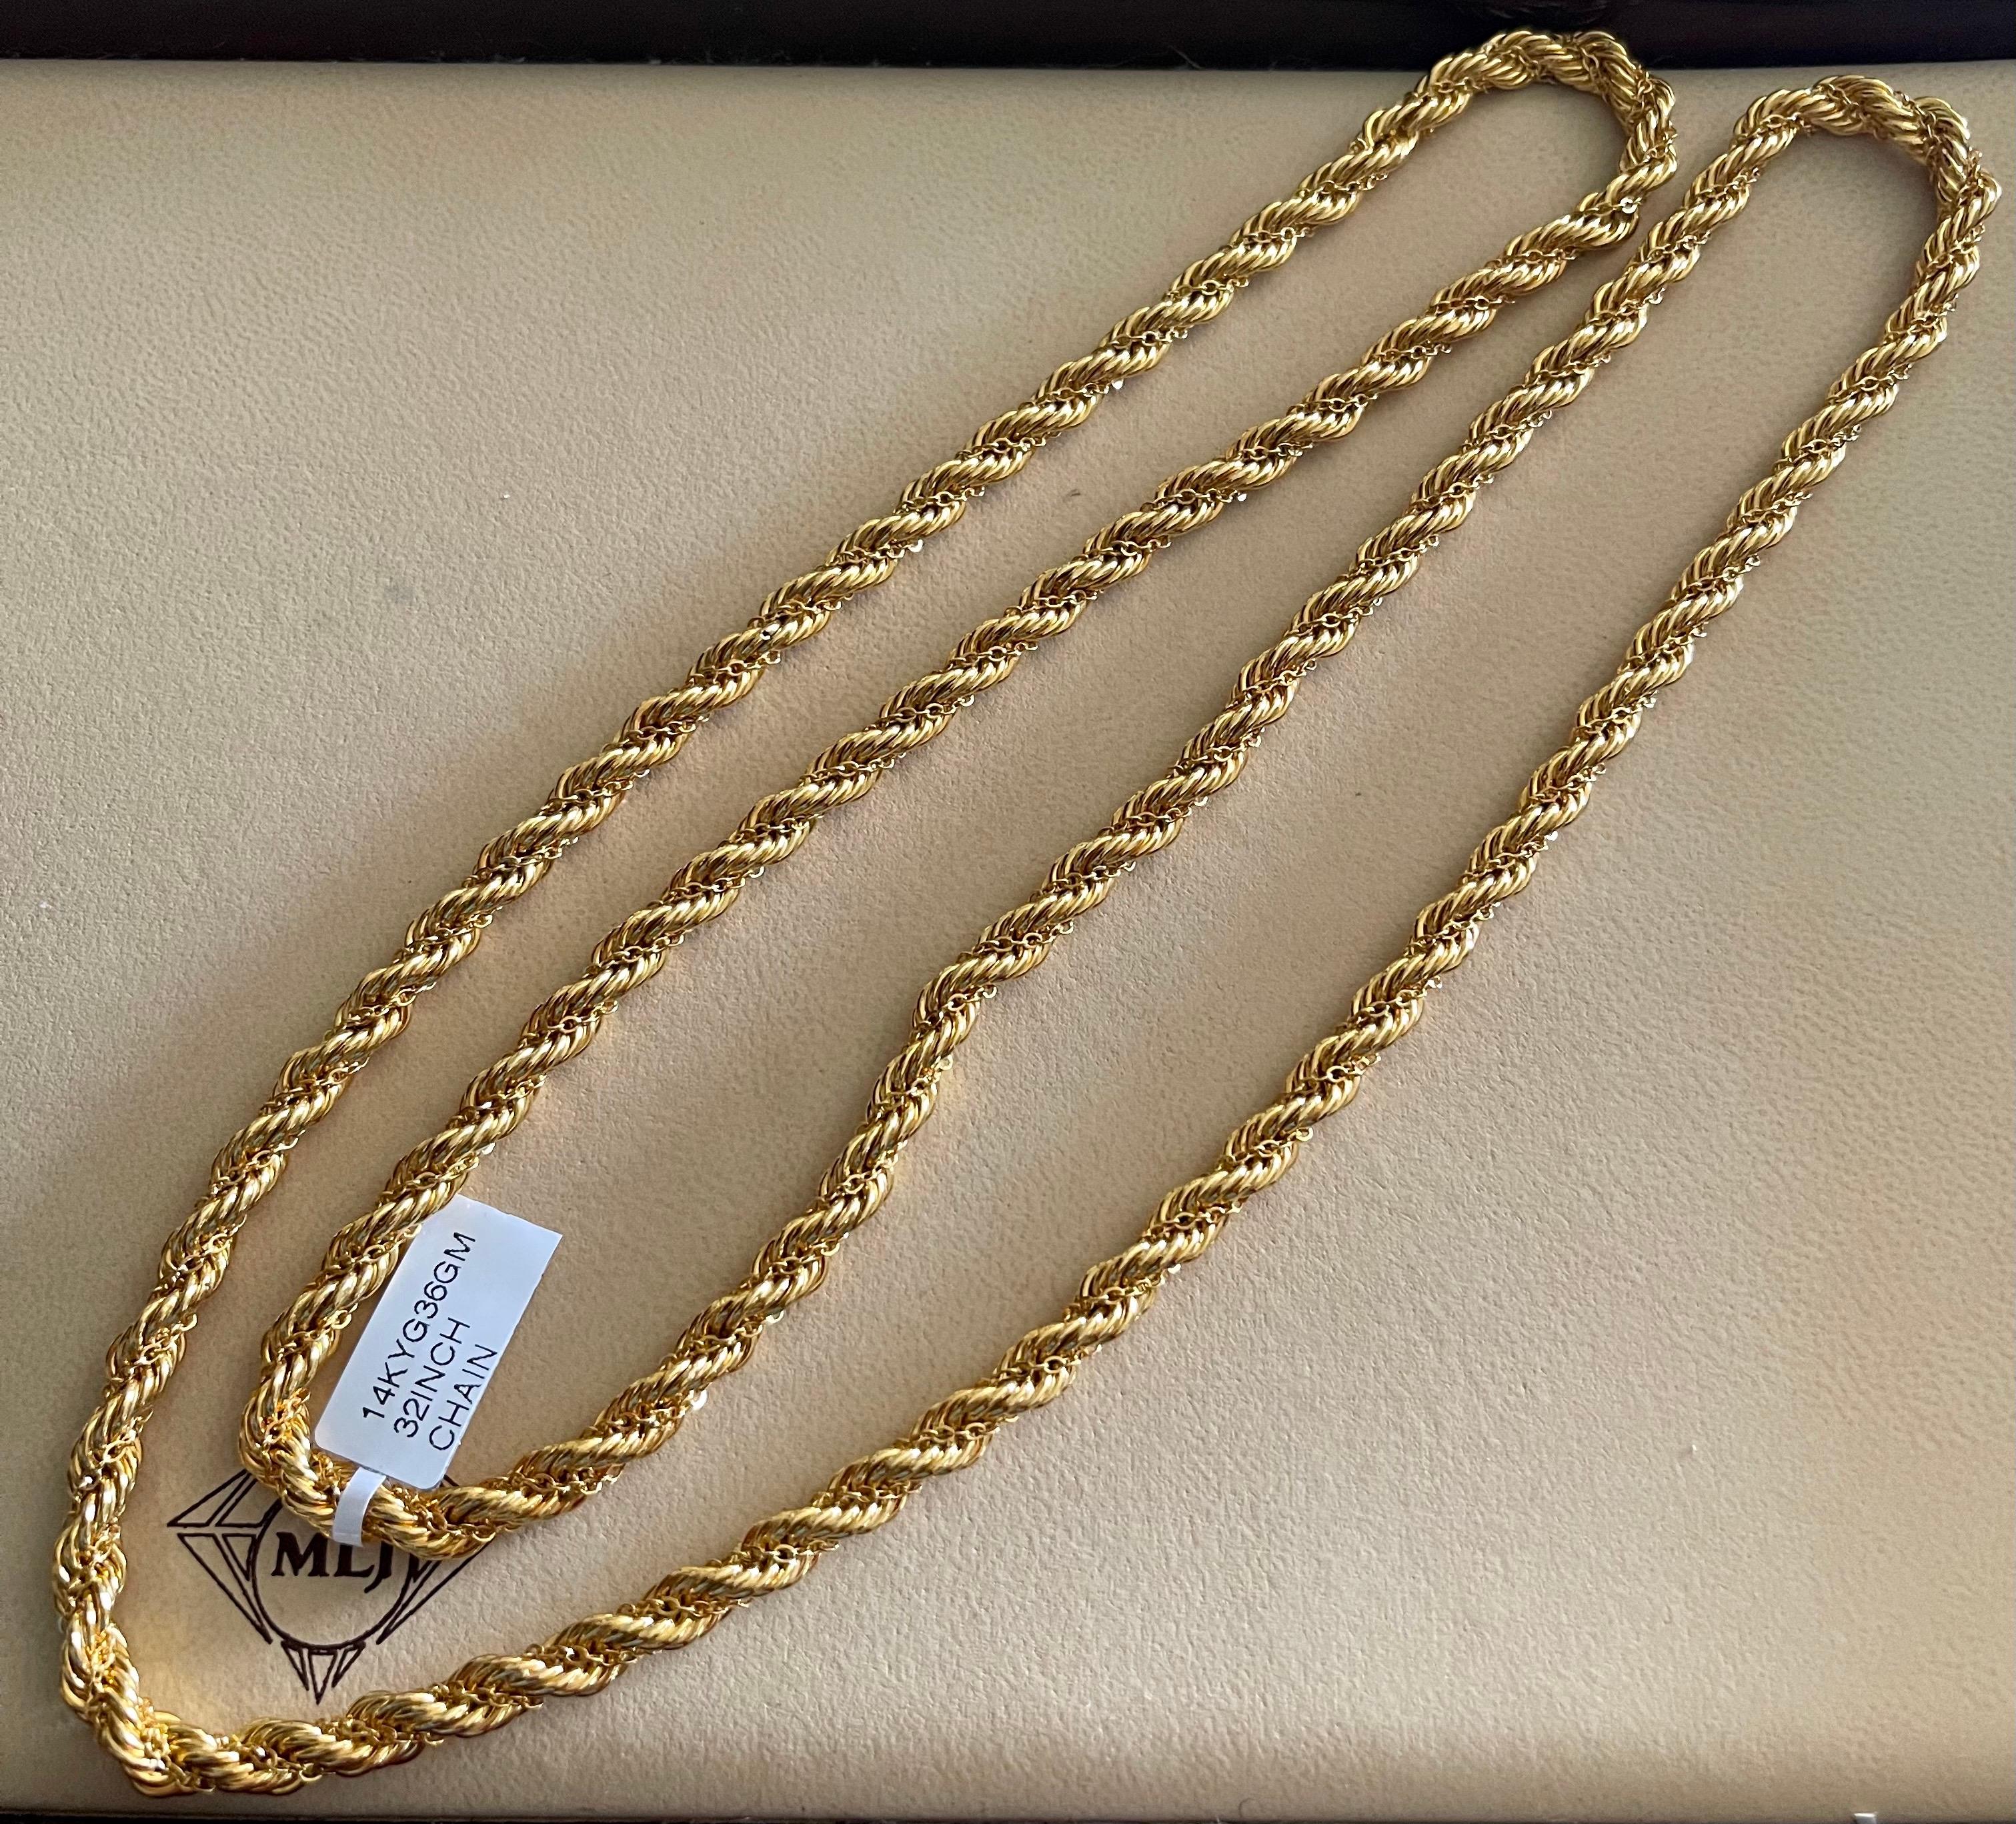 Vintage 14 karat Yellow Gold 36 Gm Rope Chain , 32 Inches long , Opera Length
5.5 MM wide
32 Inches long Necklace
Beautiful link design Necklace 
Weight of the Necklace is 36 Grams 

Please look at all the pictures
Its very hard to capture the true